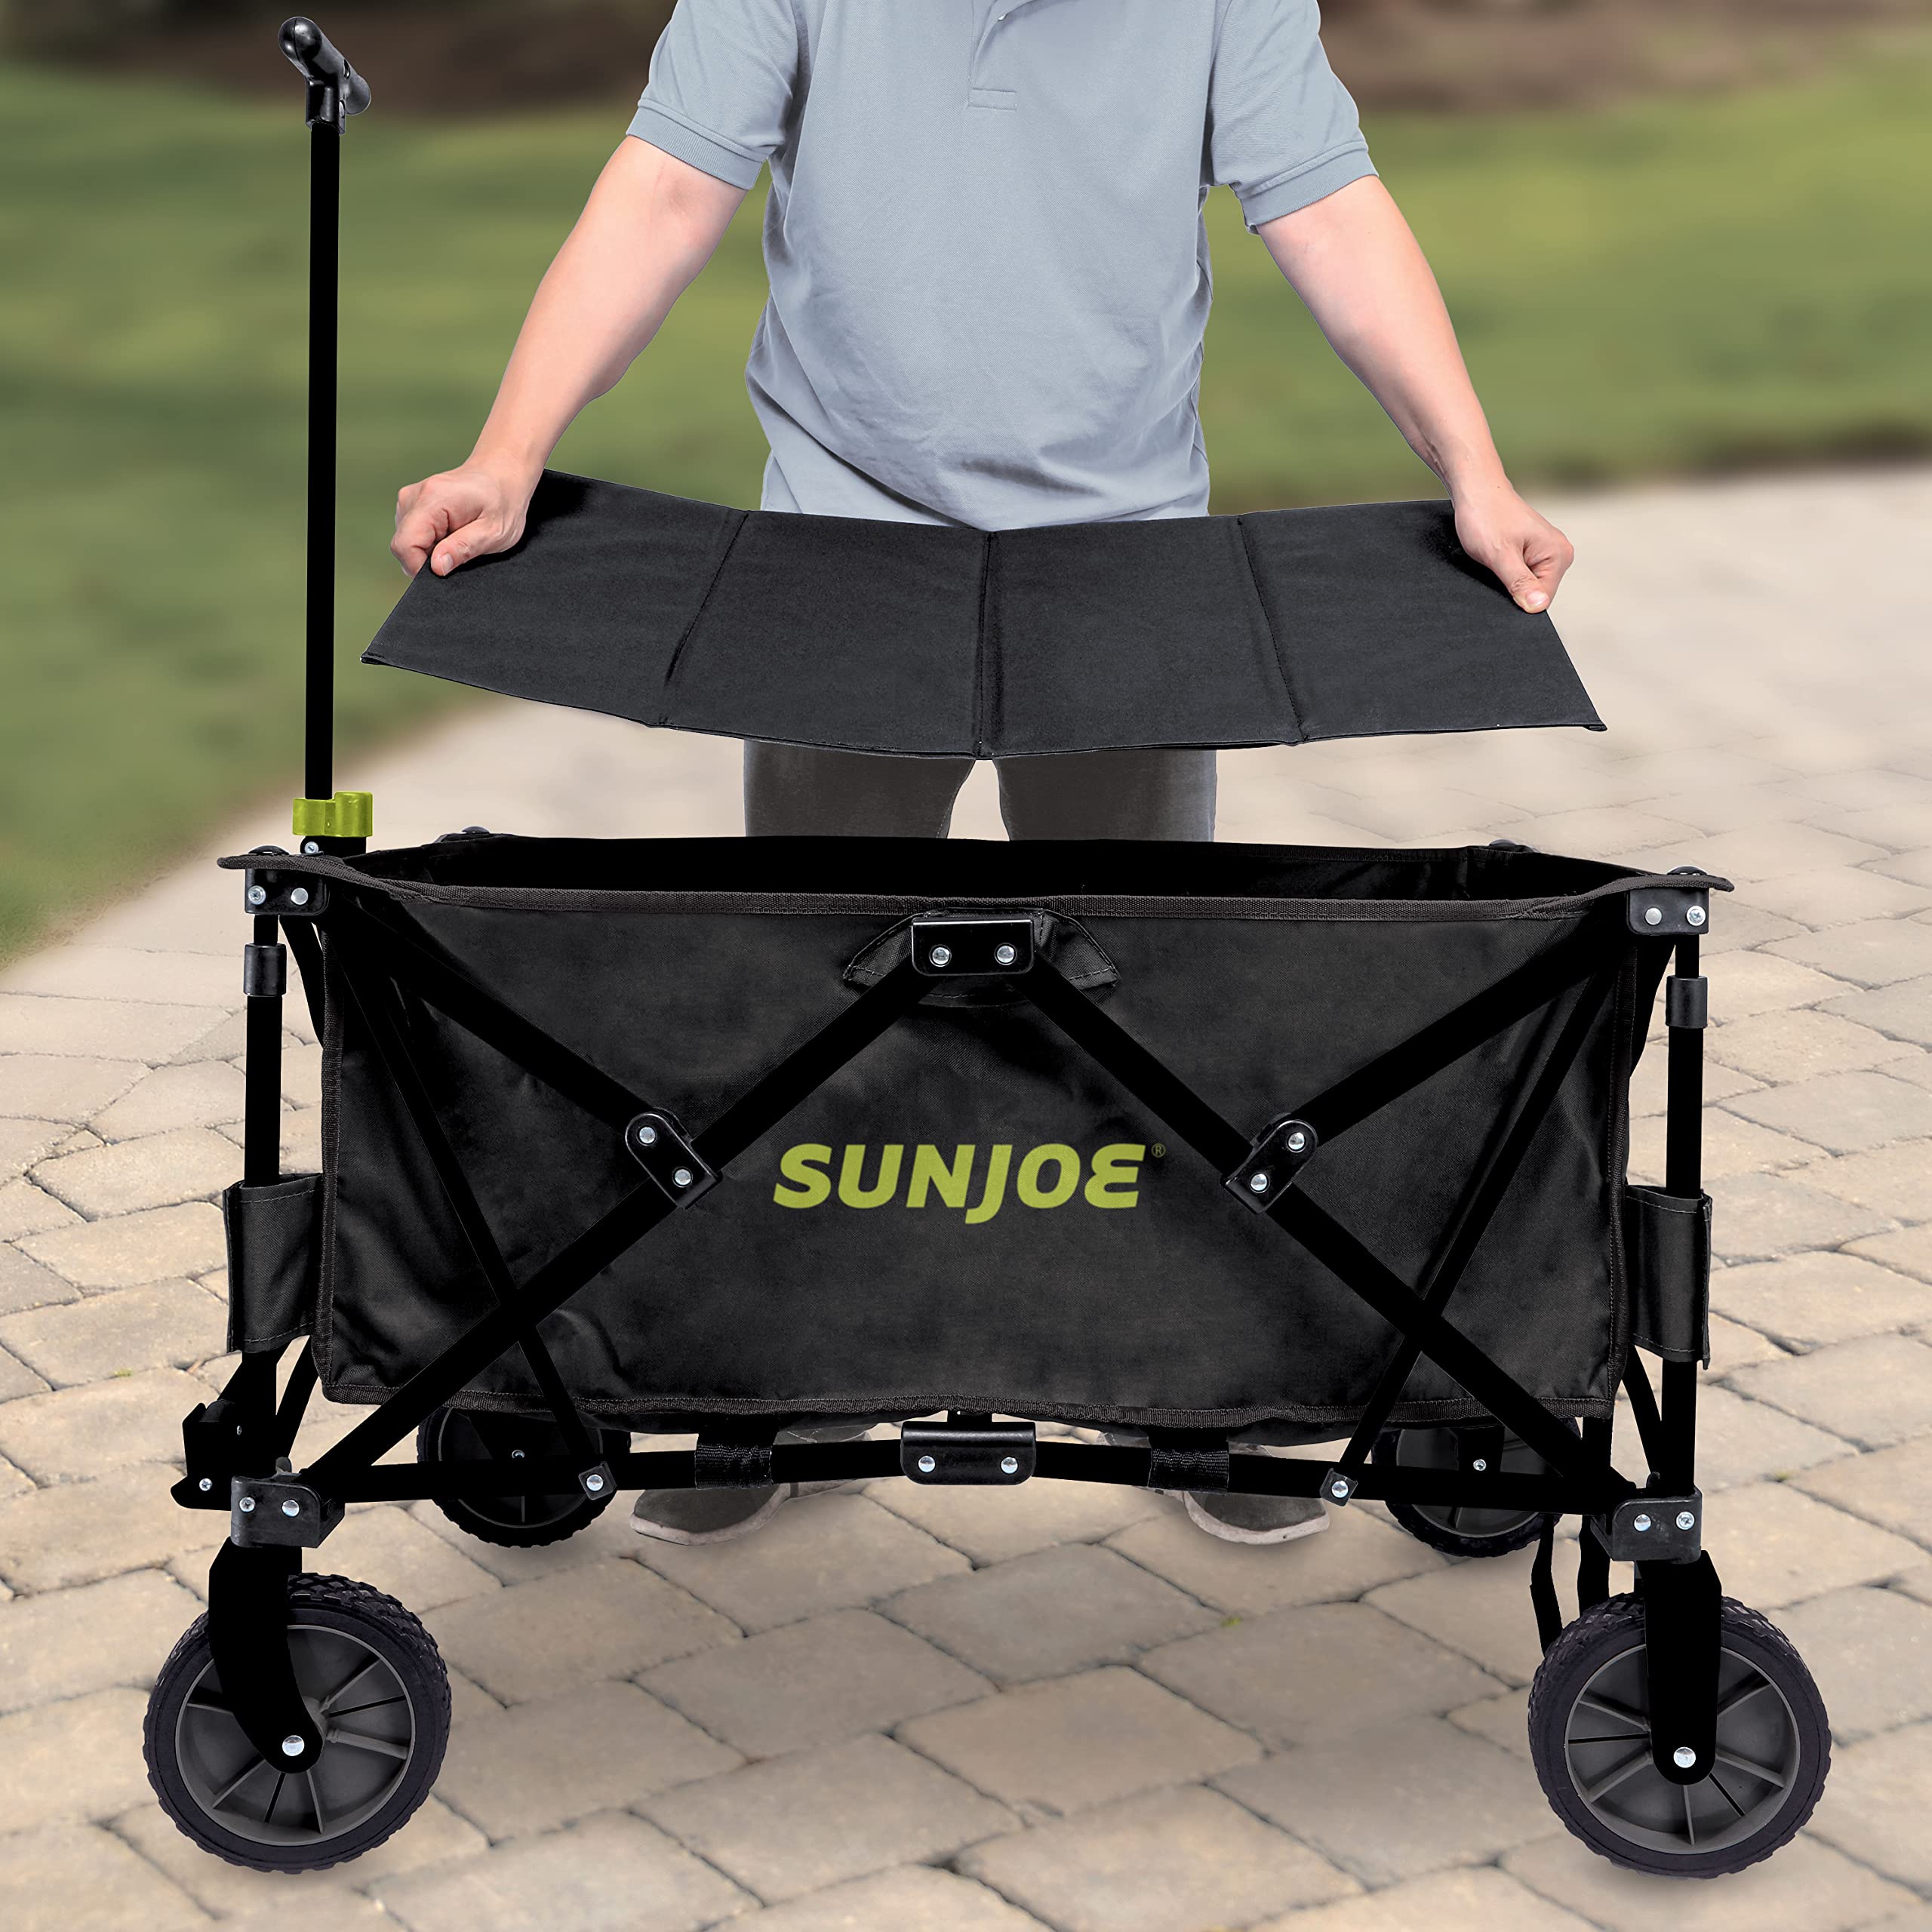 Sun Joe SJ-HDFC1 Heavy-Duty Metal Framed Garden Utility Wagon, w/Swivel Front Wheels & Adjustable Handle, Collapsible Design for Easy Storage and Portability, 150 Lbs Load Capacity, Black